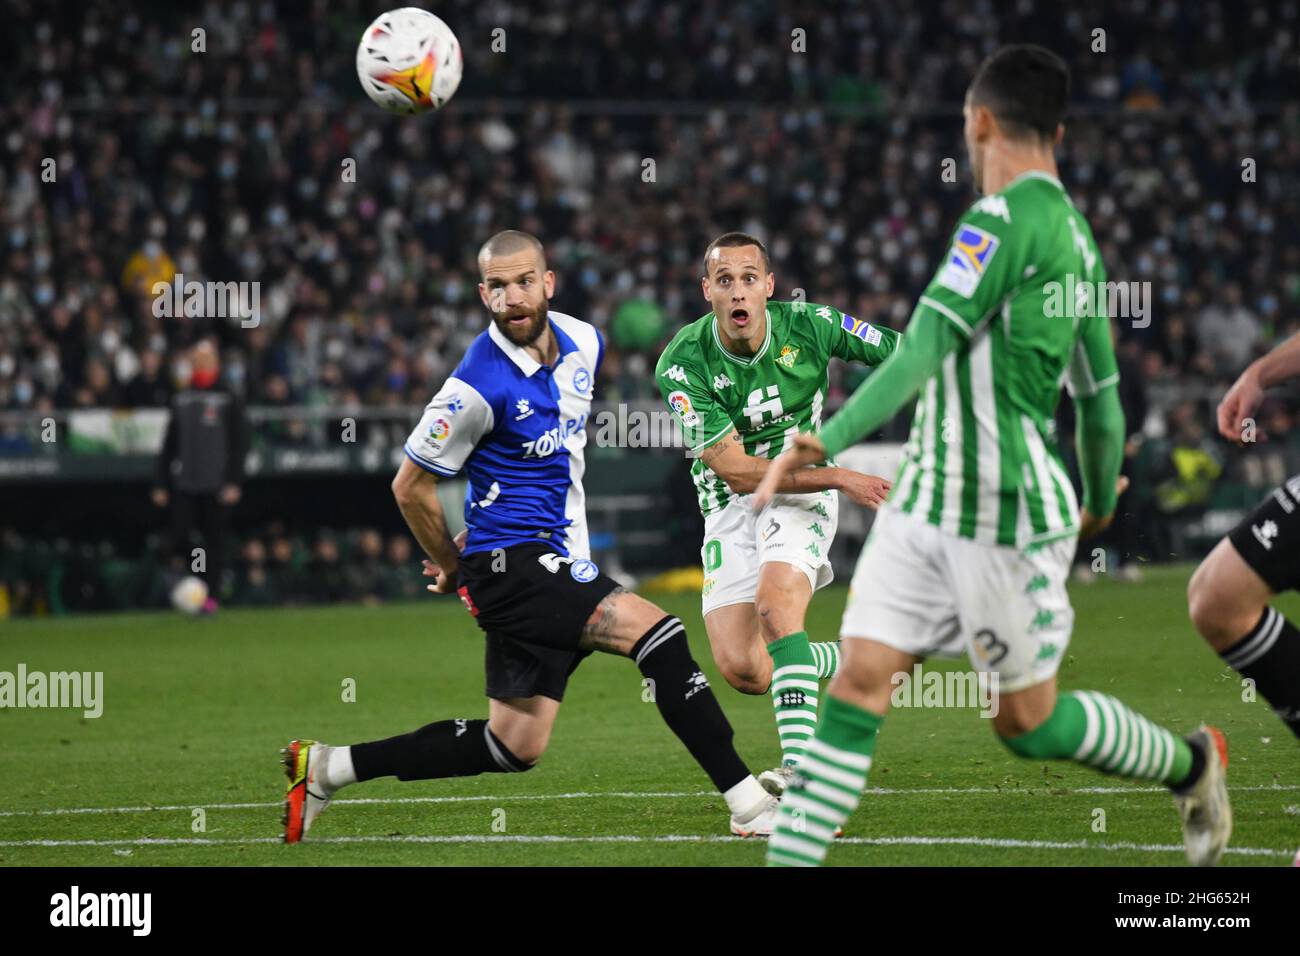 SEVILLE, SPAIN - JANUARY 18: Sergio Canales #10 of Real Betis scores a goal during the La Liga match between Real Betis and Alavés at Benito Villamarín Stadium on January 18, 2022 in Seville, Spain. (Photo by Sara Aribó/PxImages) Stock Photo